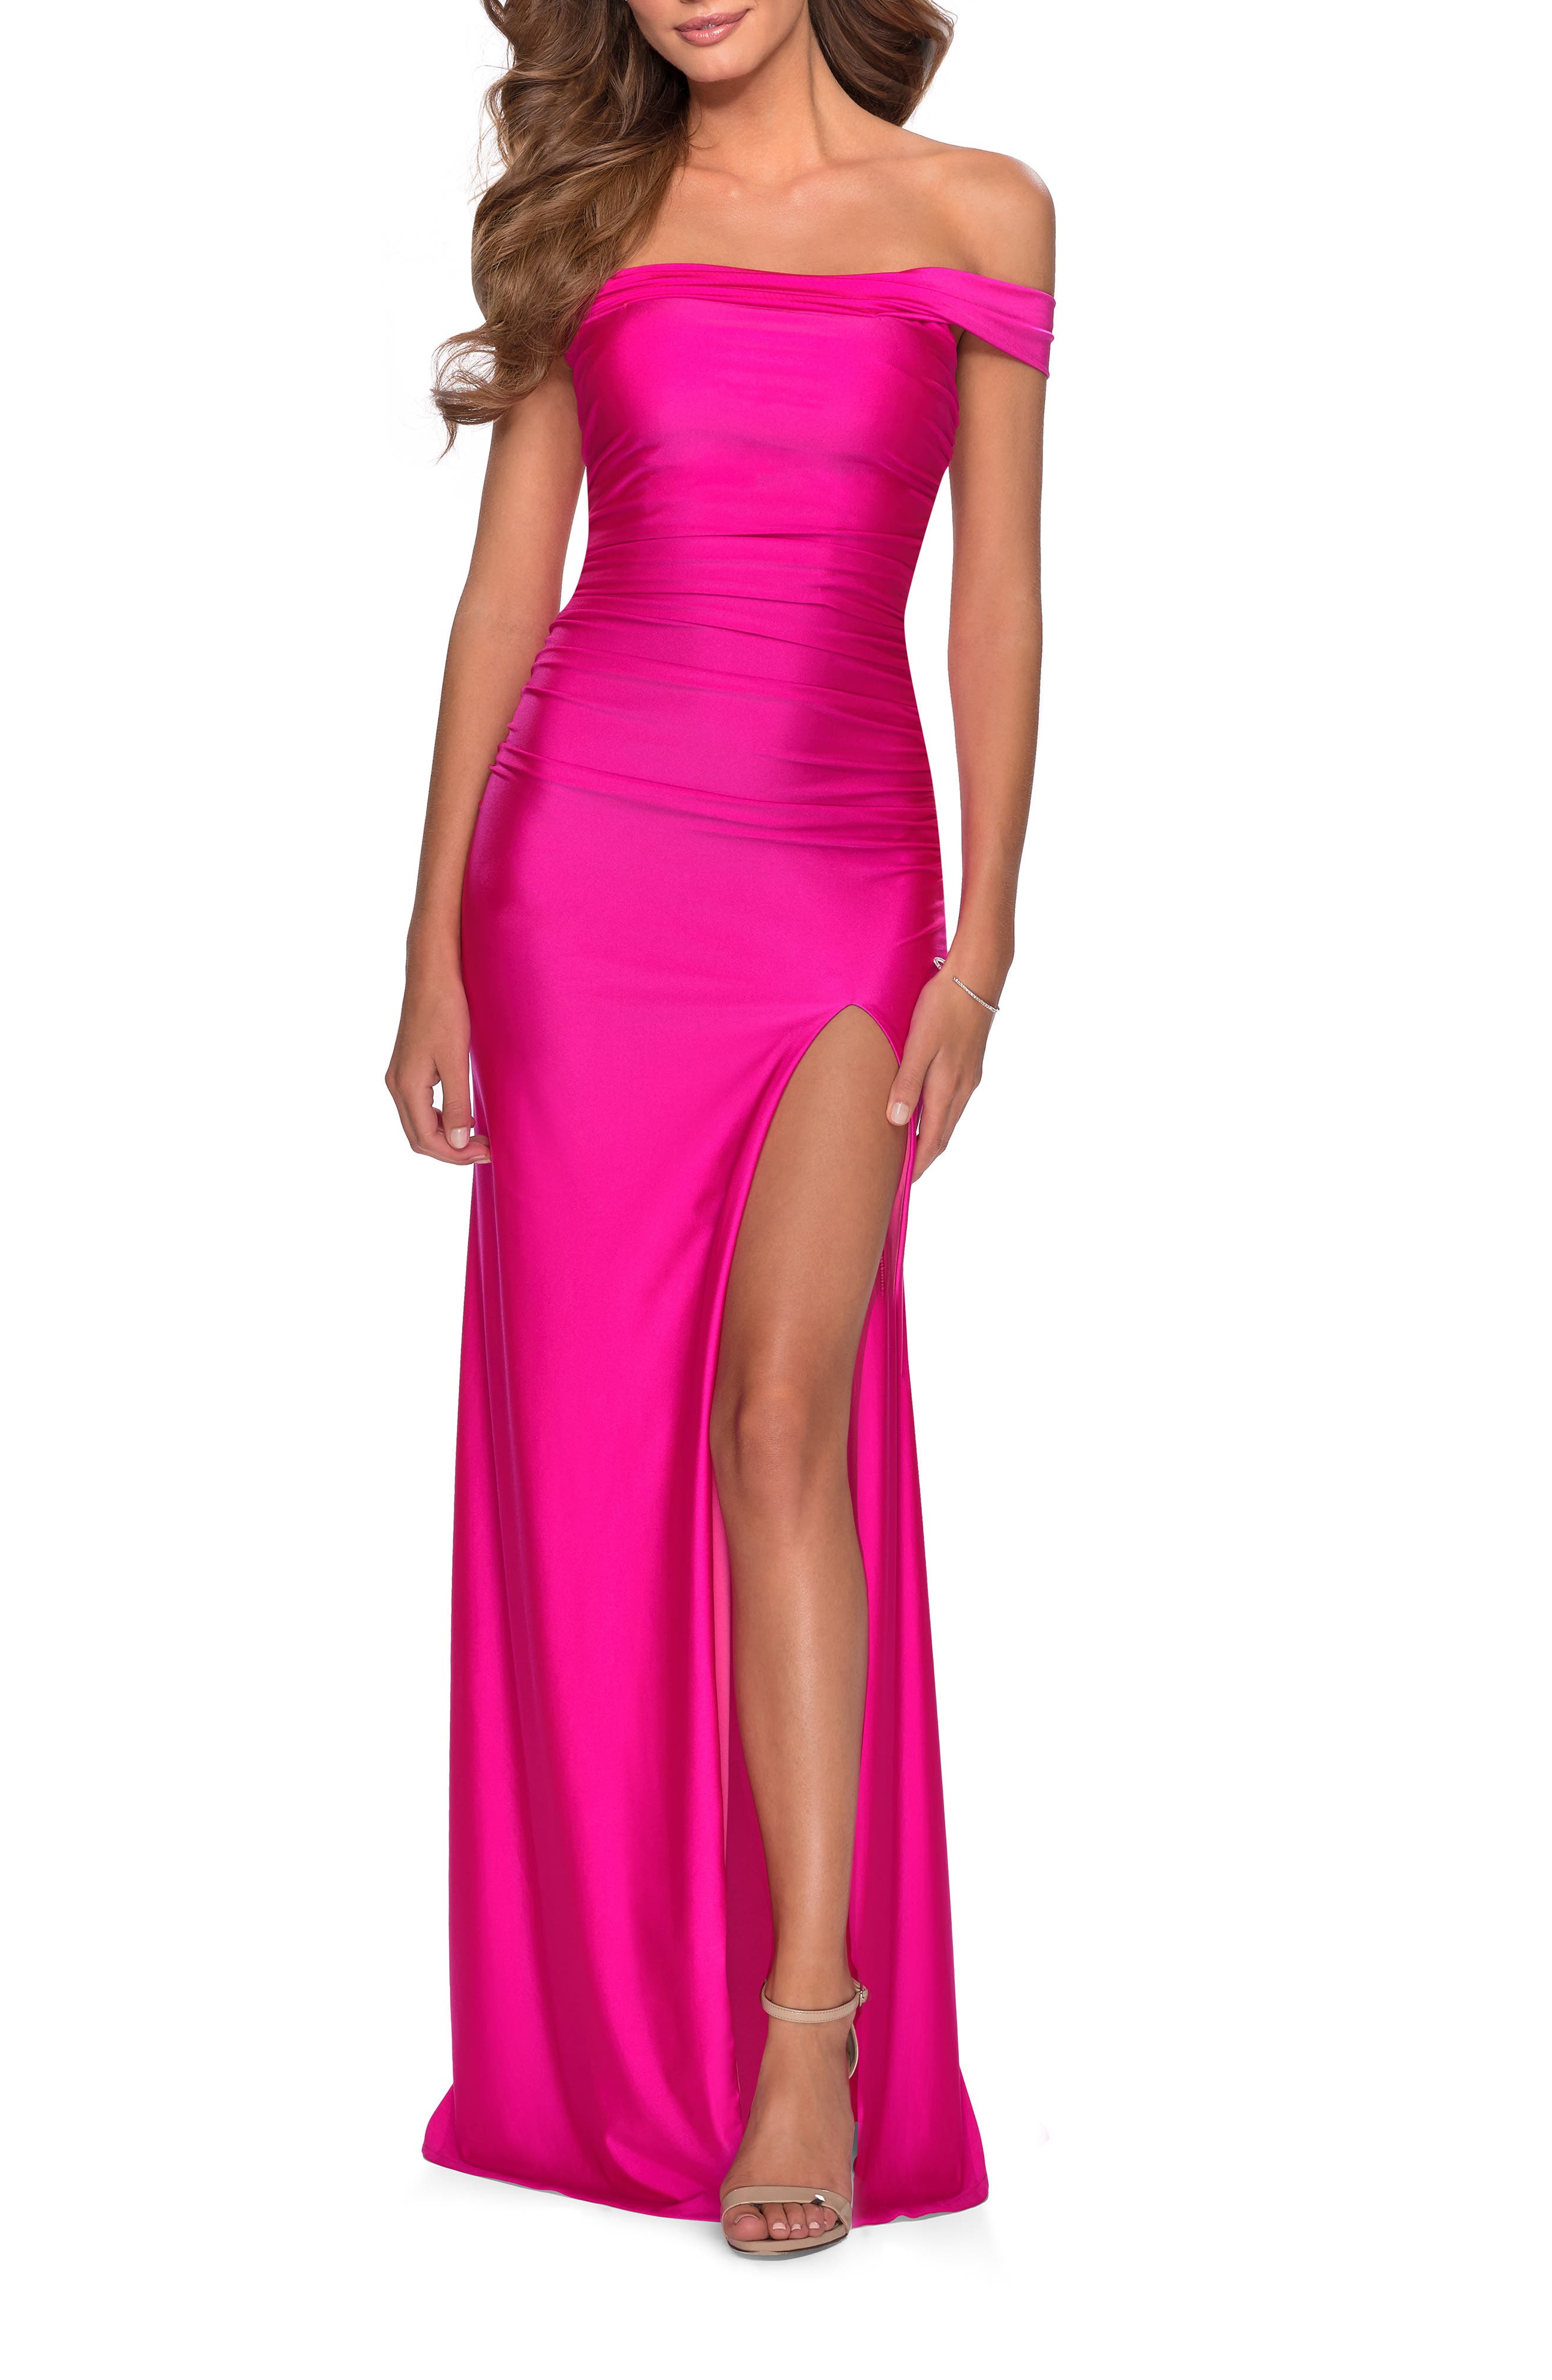 Neon pink Gown